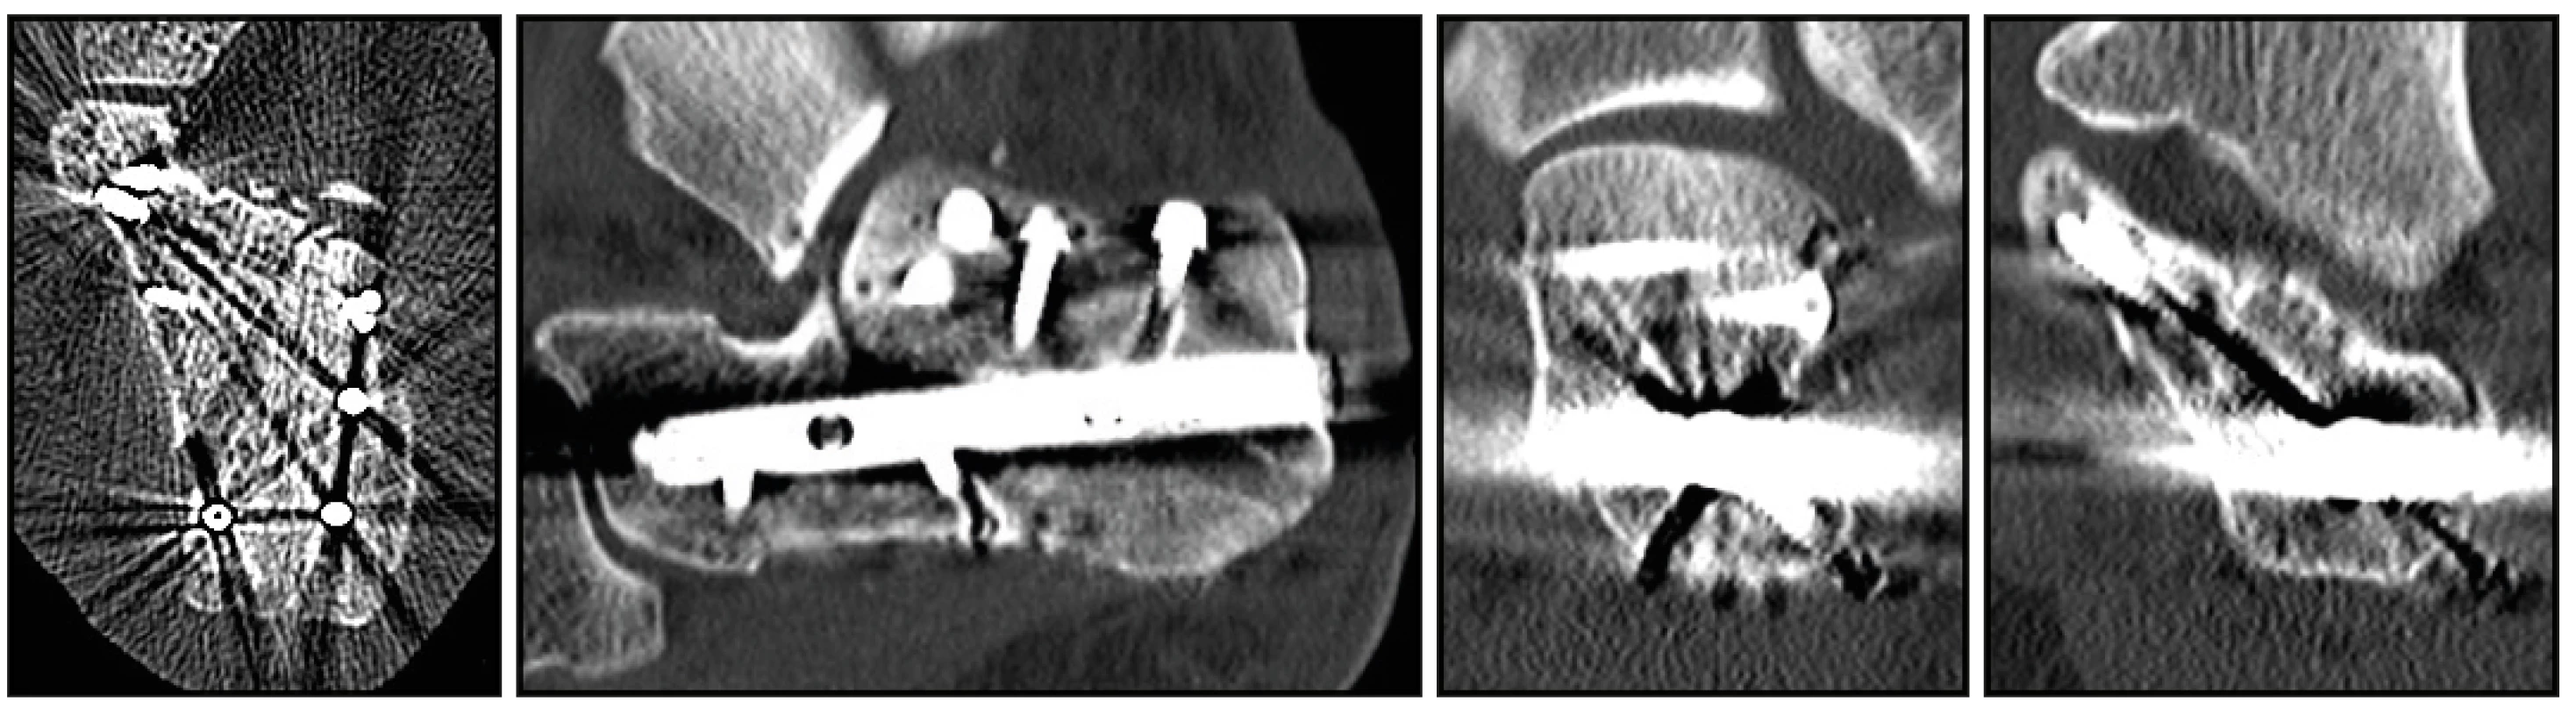 Postoperative CT images after osteosynthesis of calcaneus fracture with C-nail